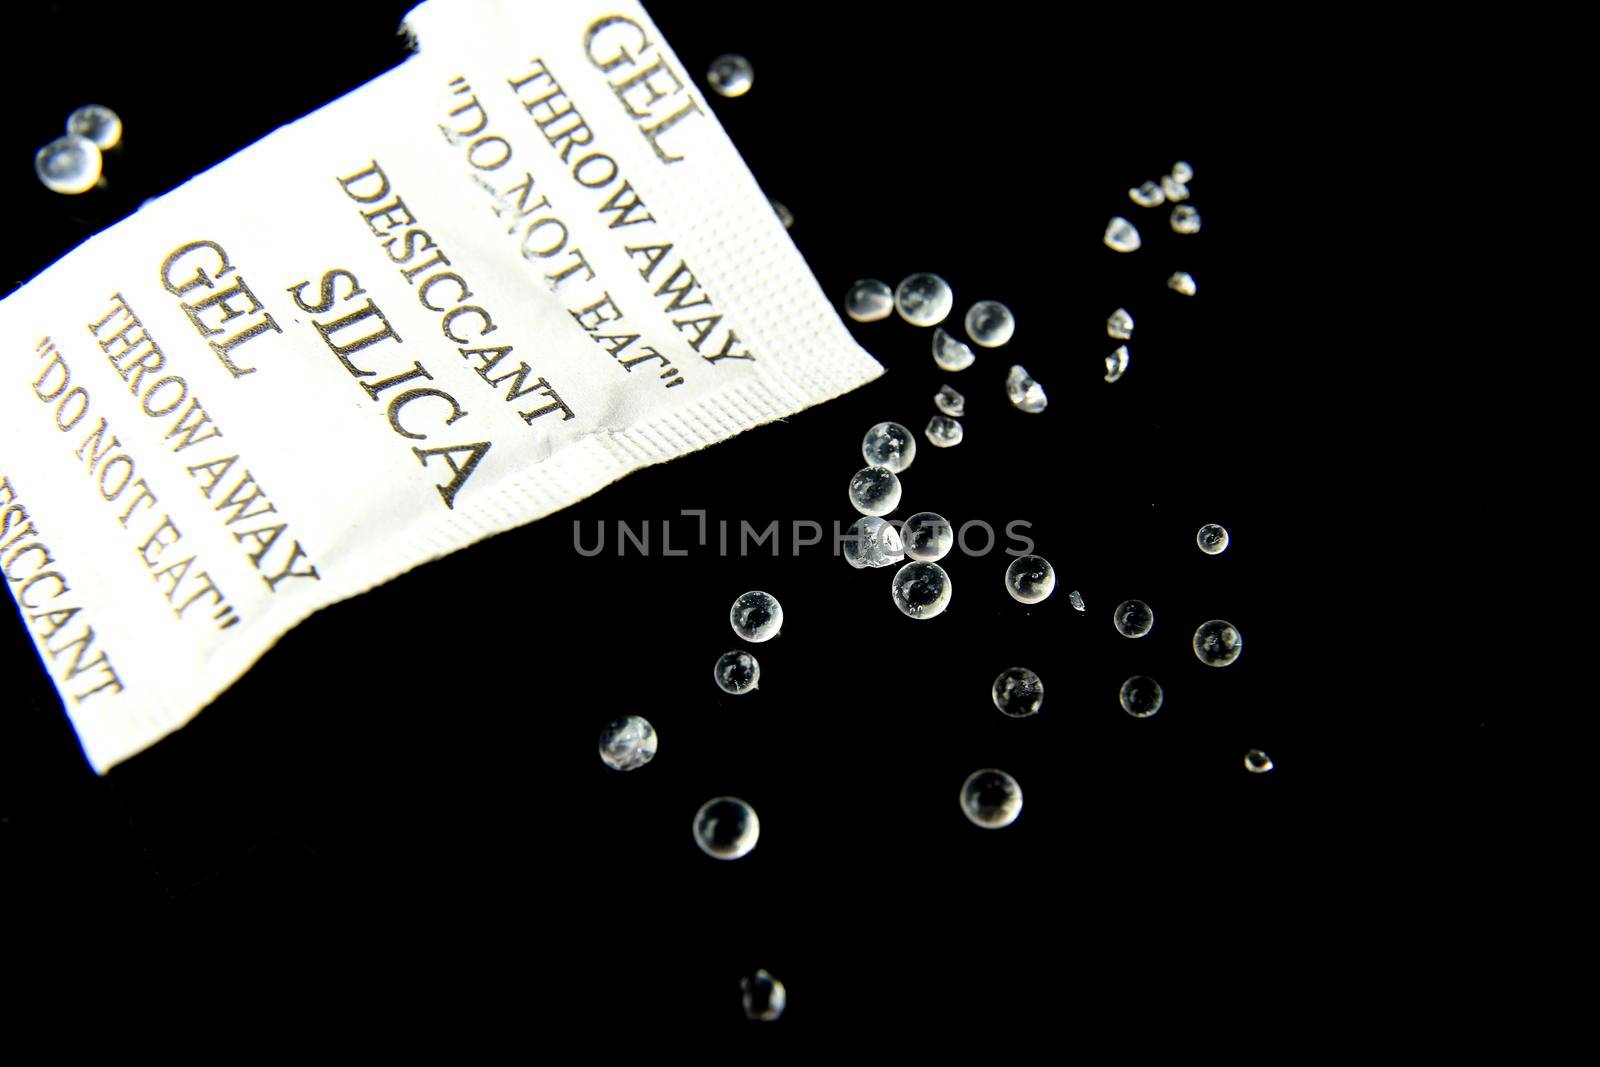 Open packet of Silica Gel Beads on black background by soniabonet